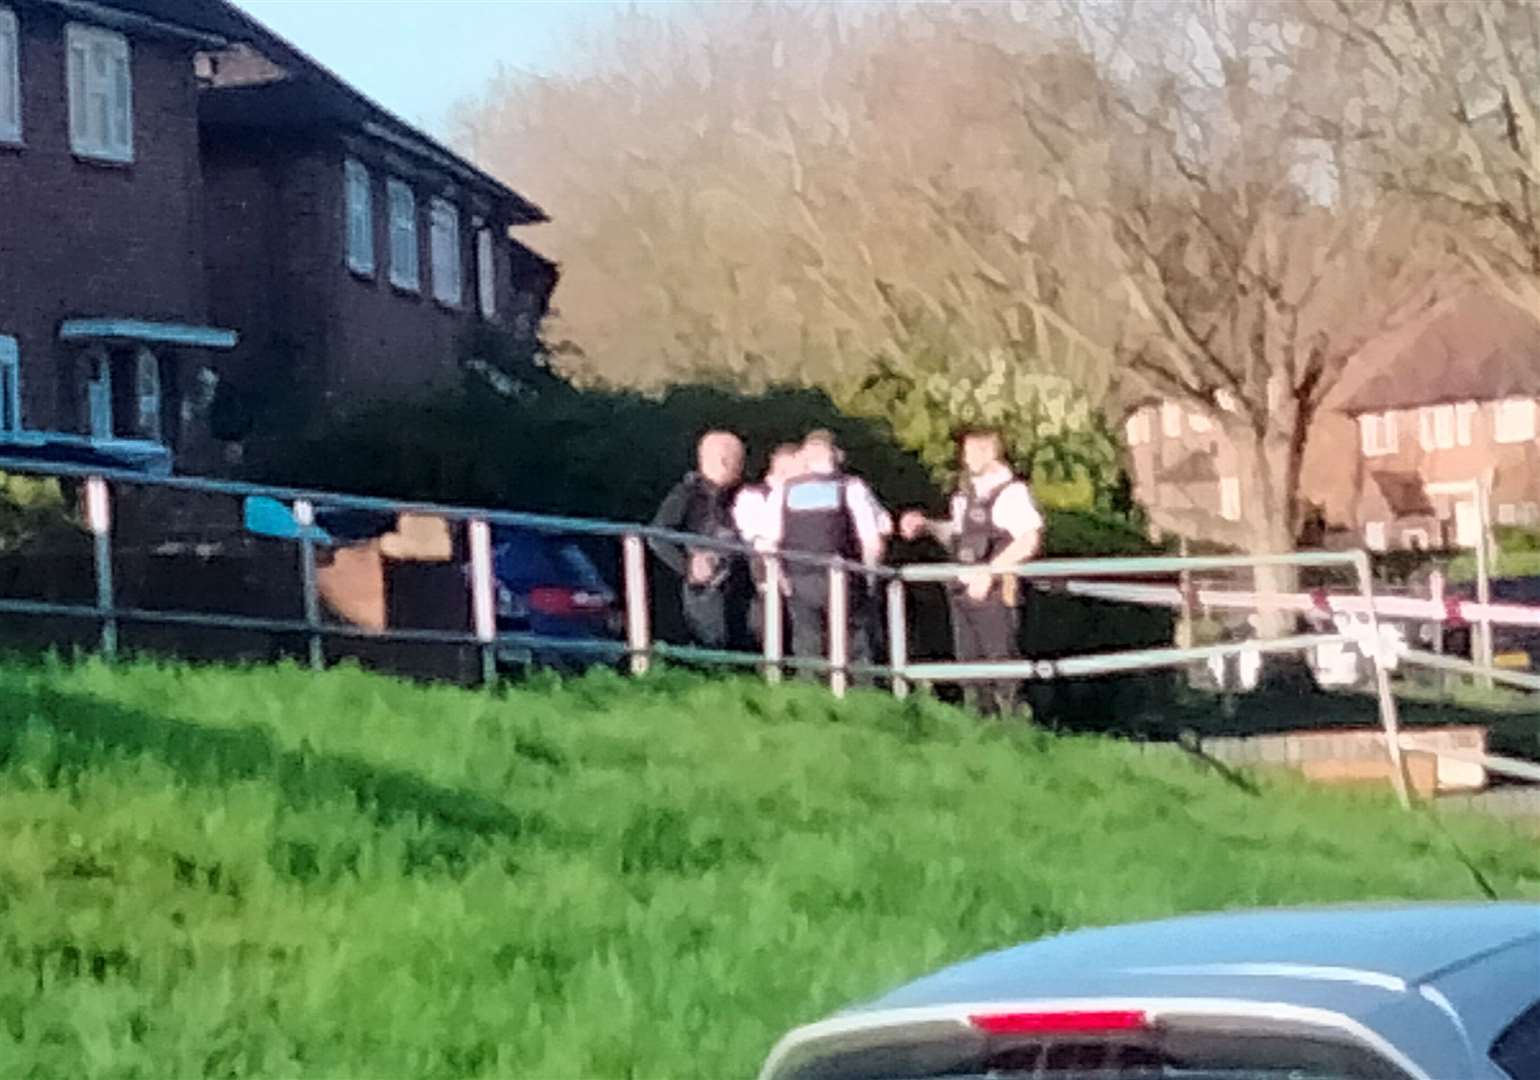 Police at the crime scene in Leesons Hill, St Pauls Cray